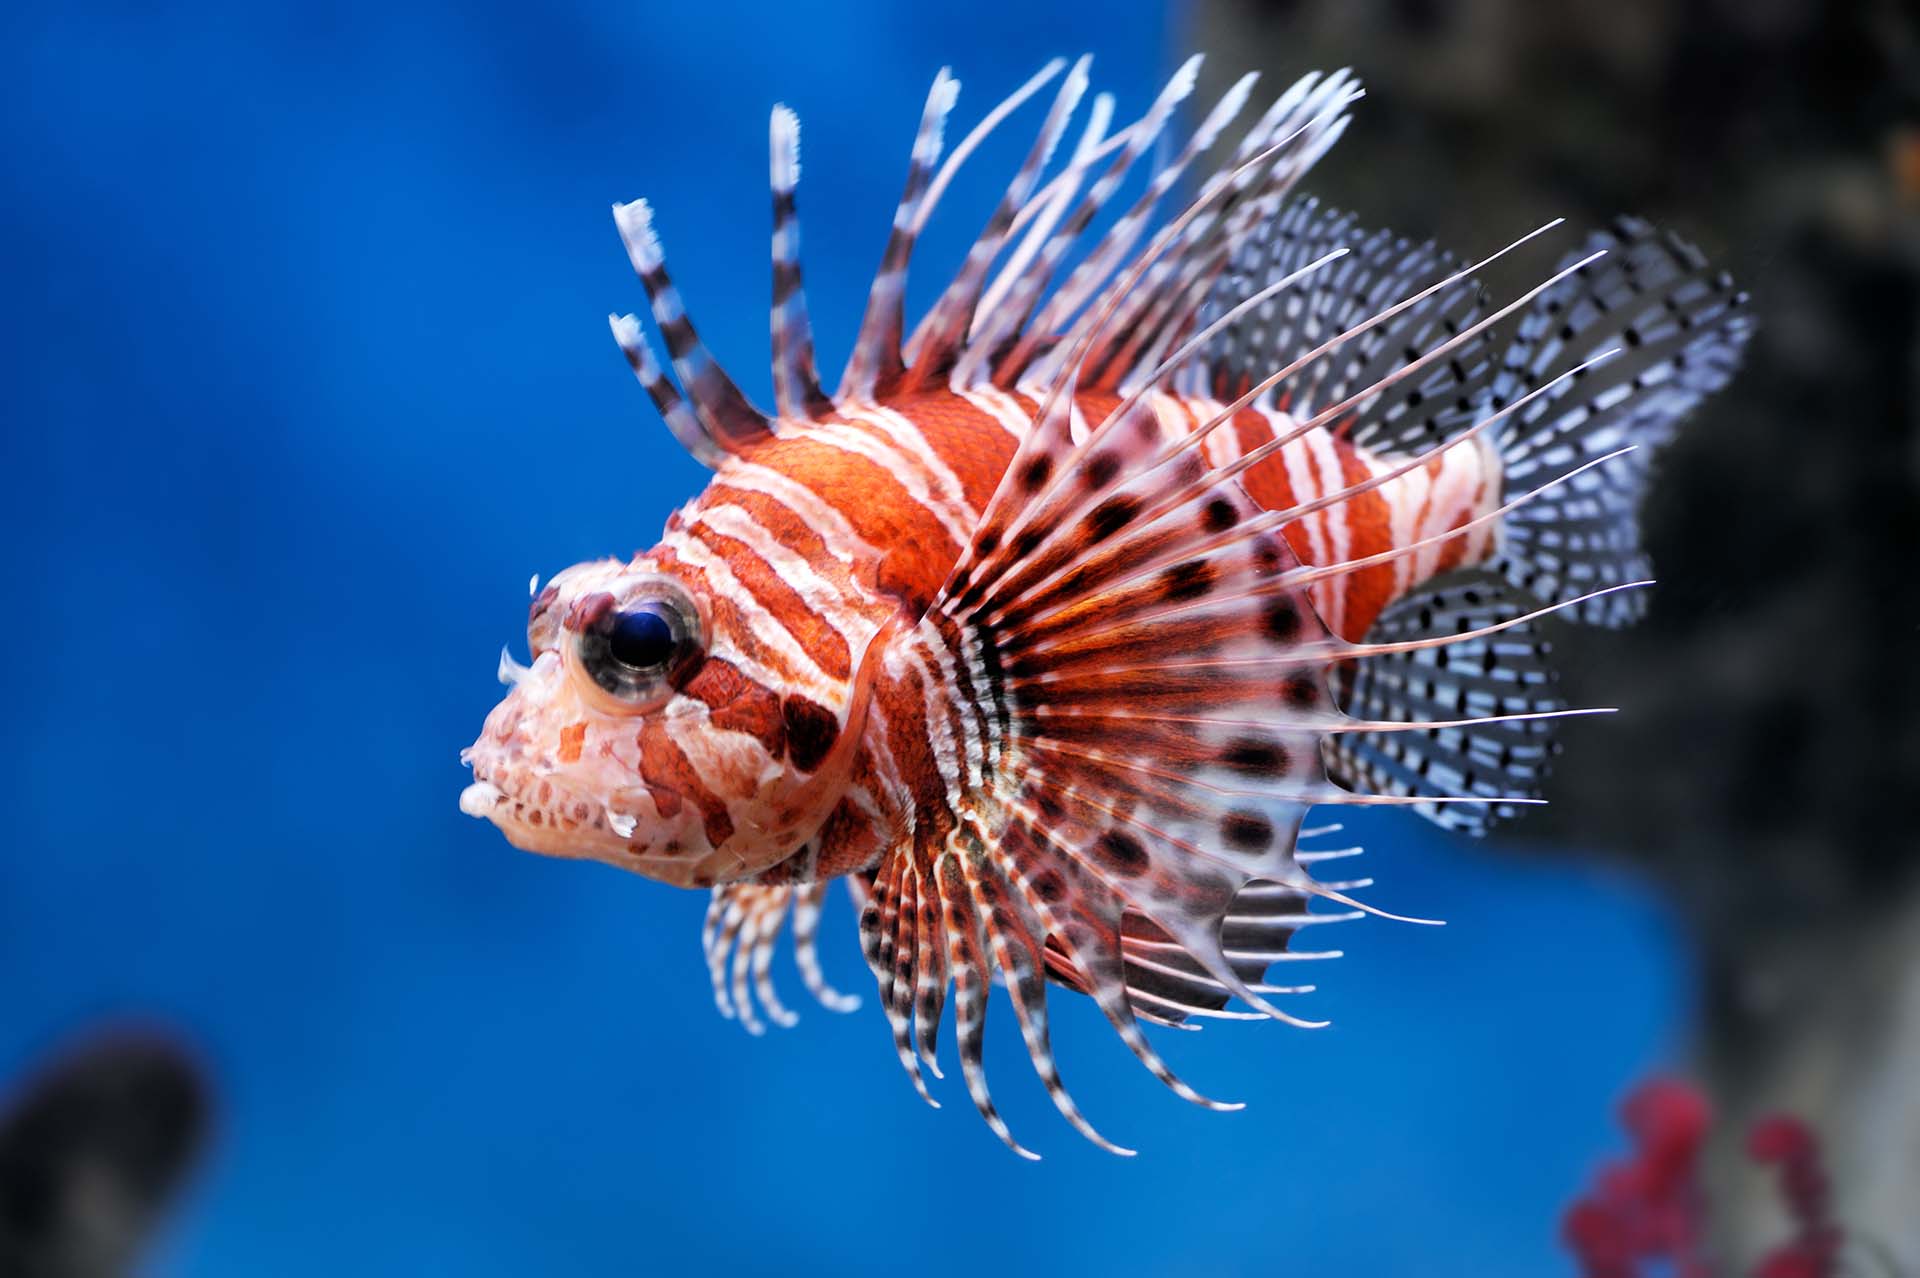 A close-up of a lionfish in water 